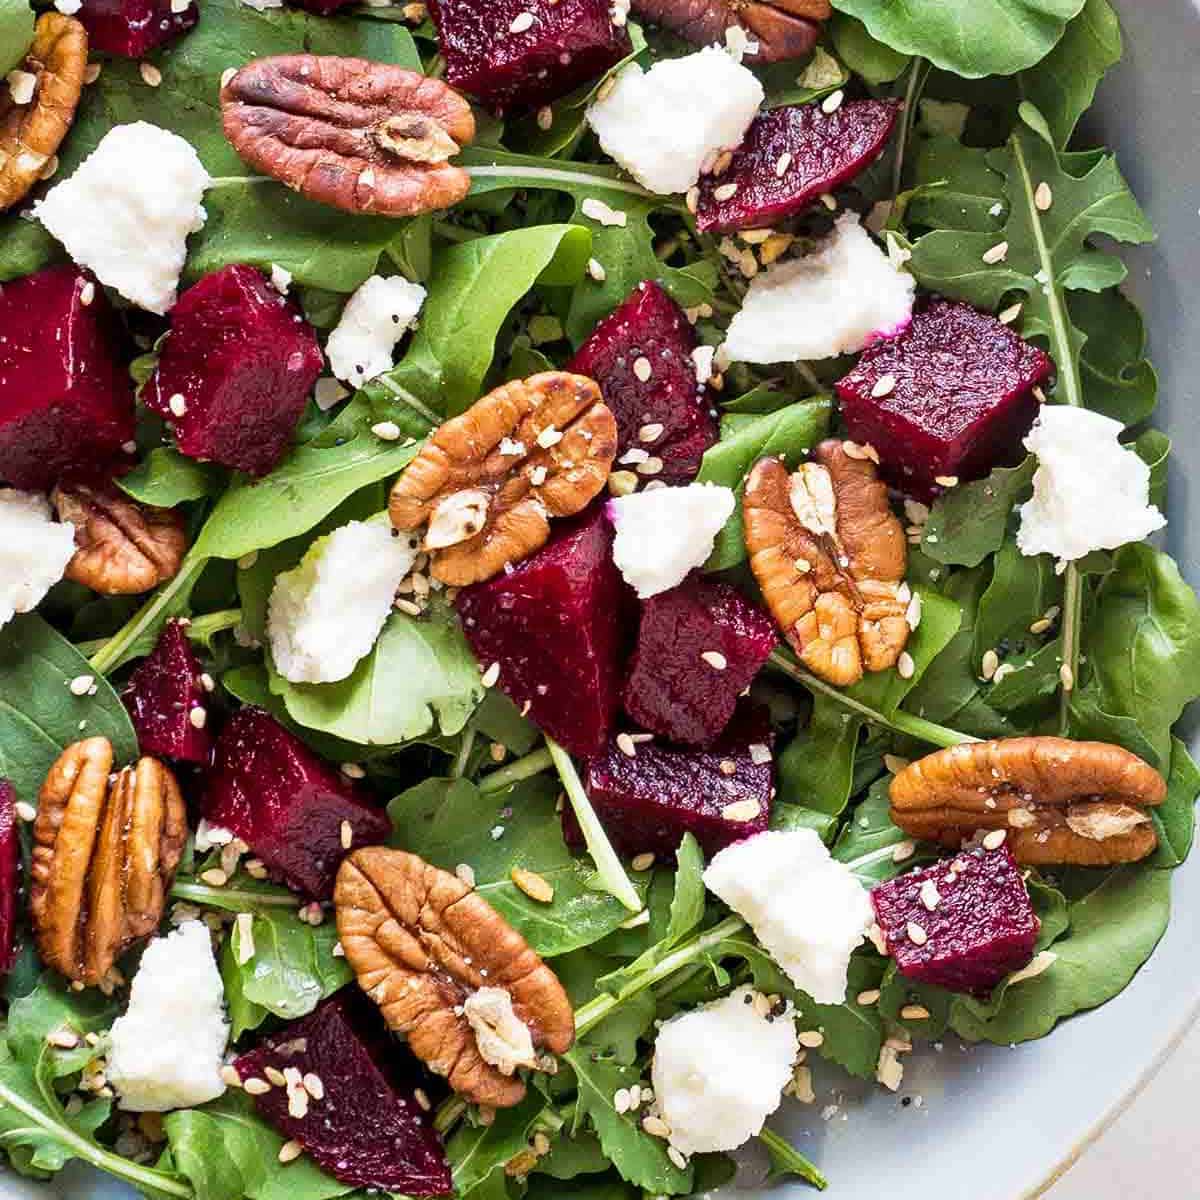 Bed of arugula leaves with cubed beets, goat cheese crumbles, pecan halves, and everything bagel seasoning